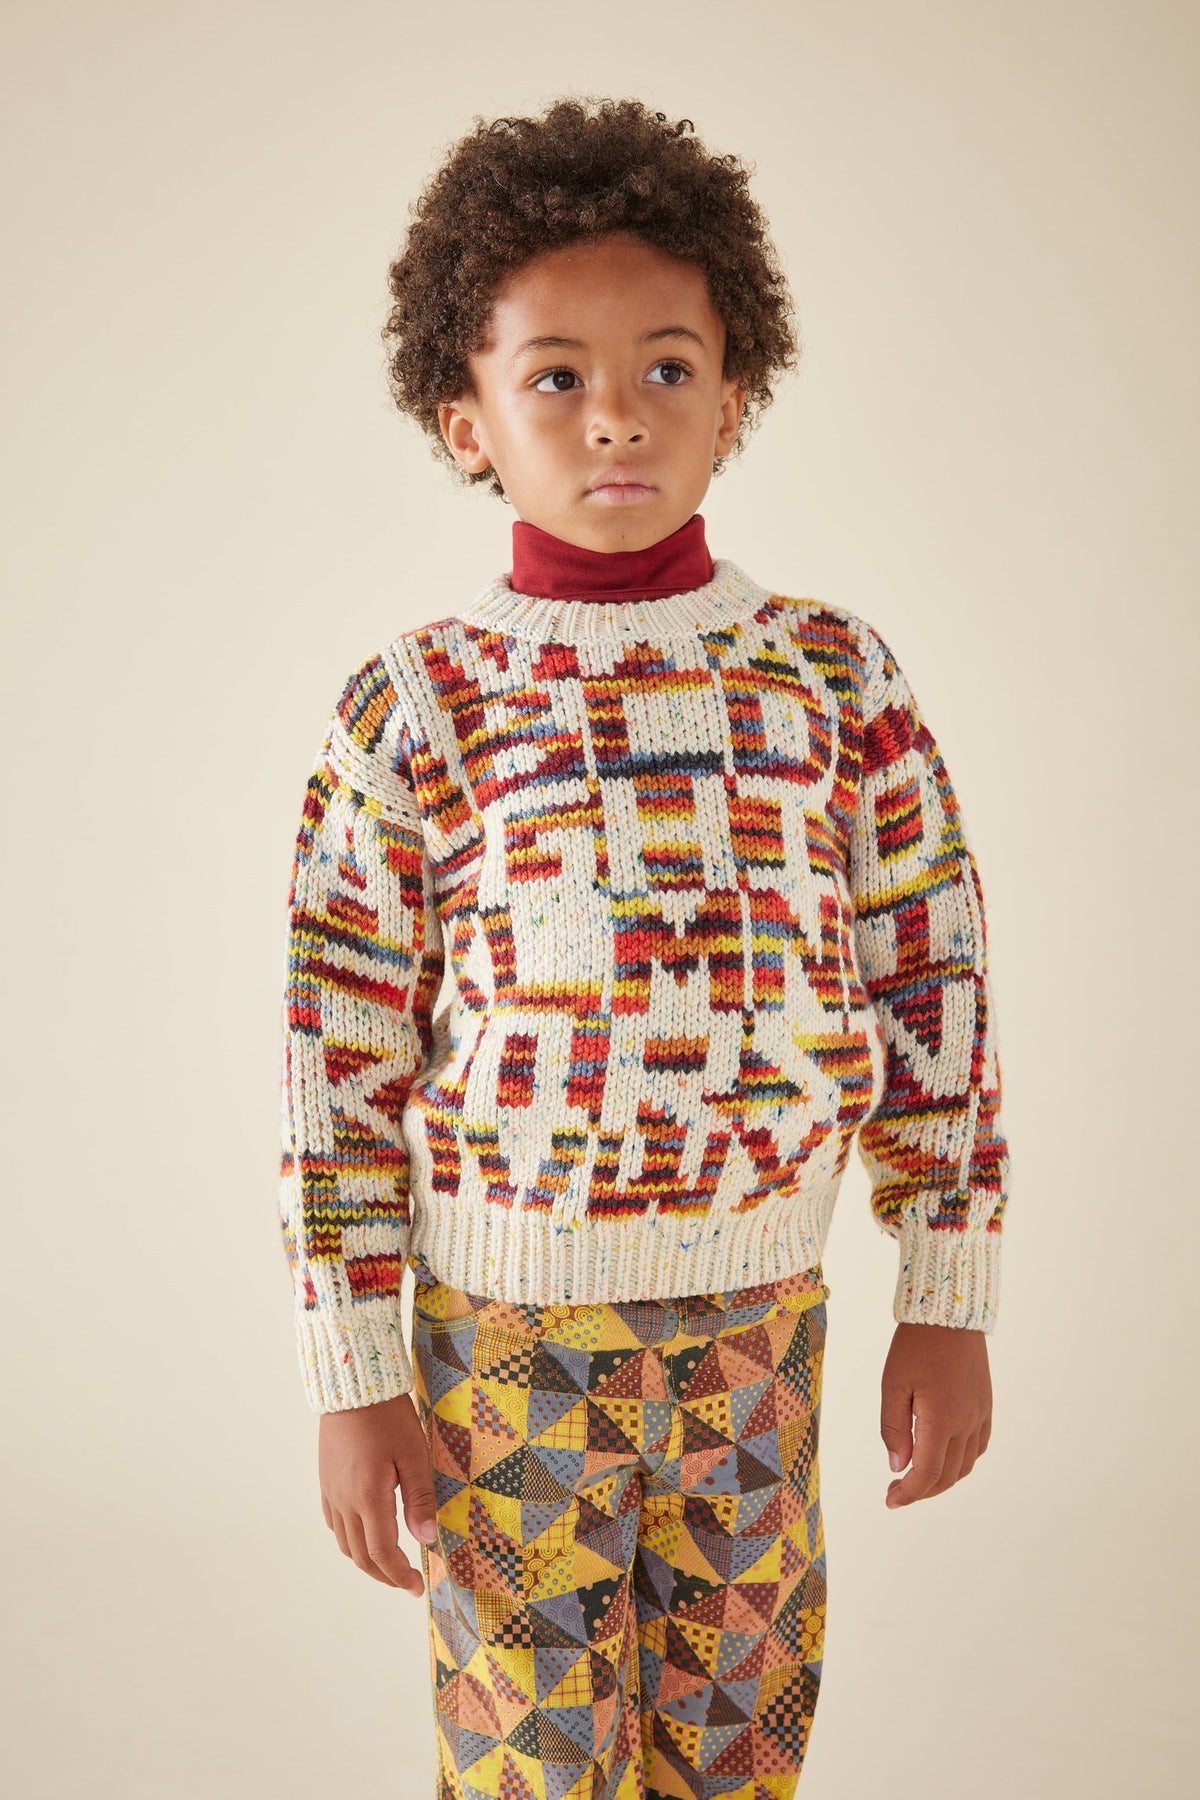 Alphabet Intarsia Sweater - Prime Confetti+Model is 45 inches tall, 46lbs, wearing a size 6-7y